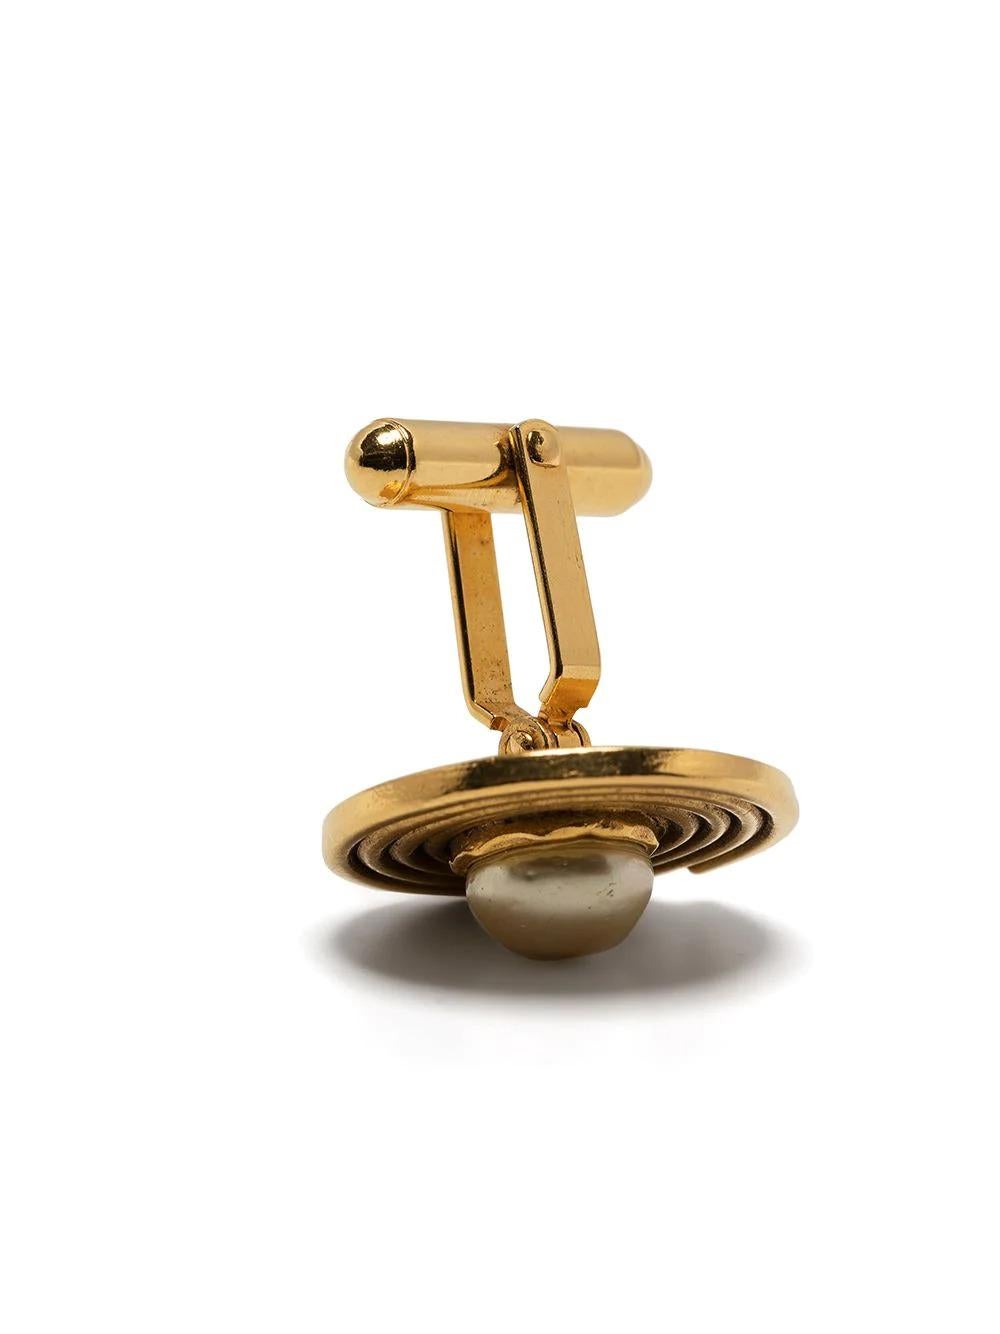 A must-have piece in any vintage designer lovers collection. These pre-owned Chanel cufflinks feature a gold-plated metal swirl with a central faux pearl. The perfect addition to your work outfit, pop through the cuffs of your favourite white shirt